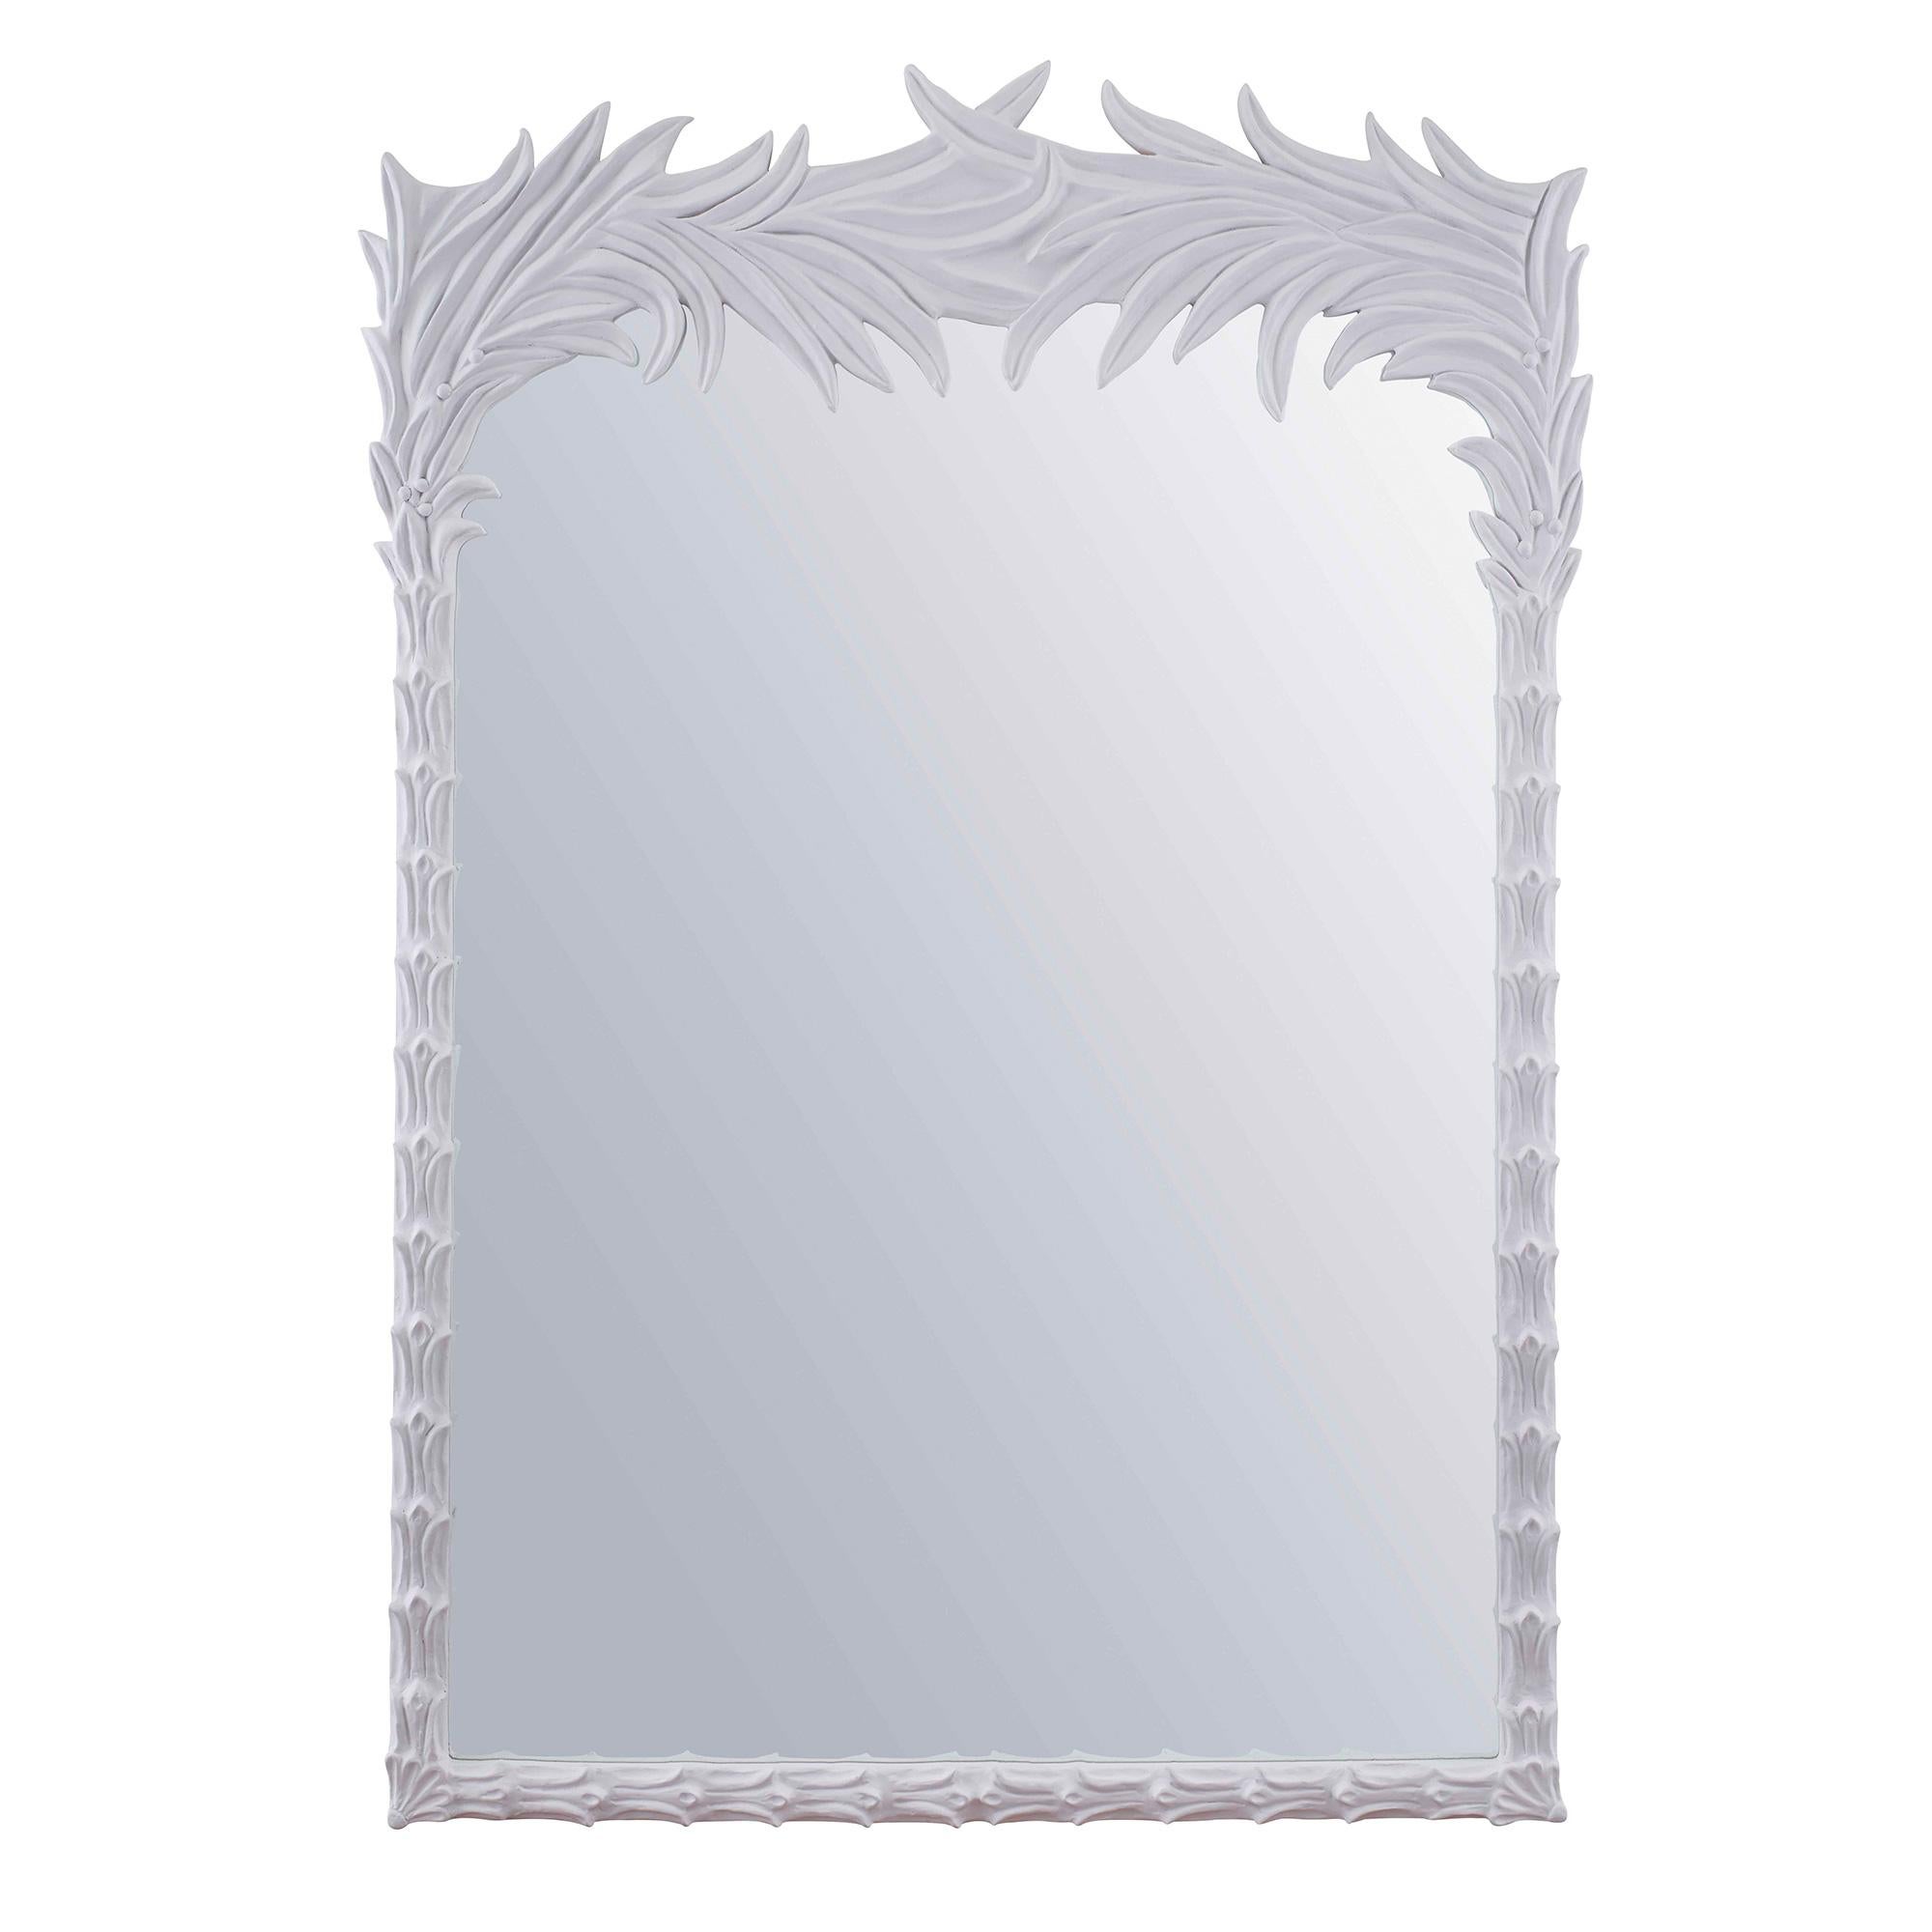 White (QR-17620.WHITE.0) Jan Showers Santa Monica Mirror with Feather Border for CuratedKravet